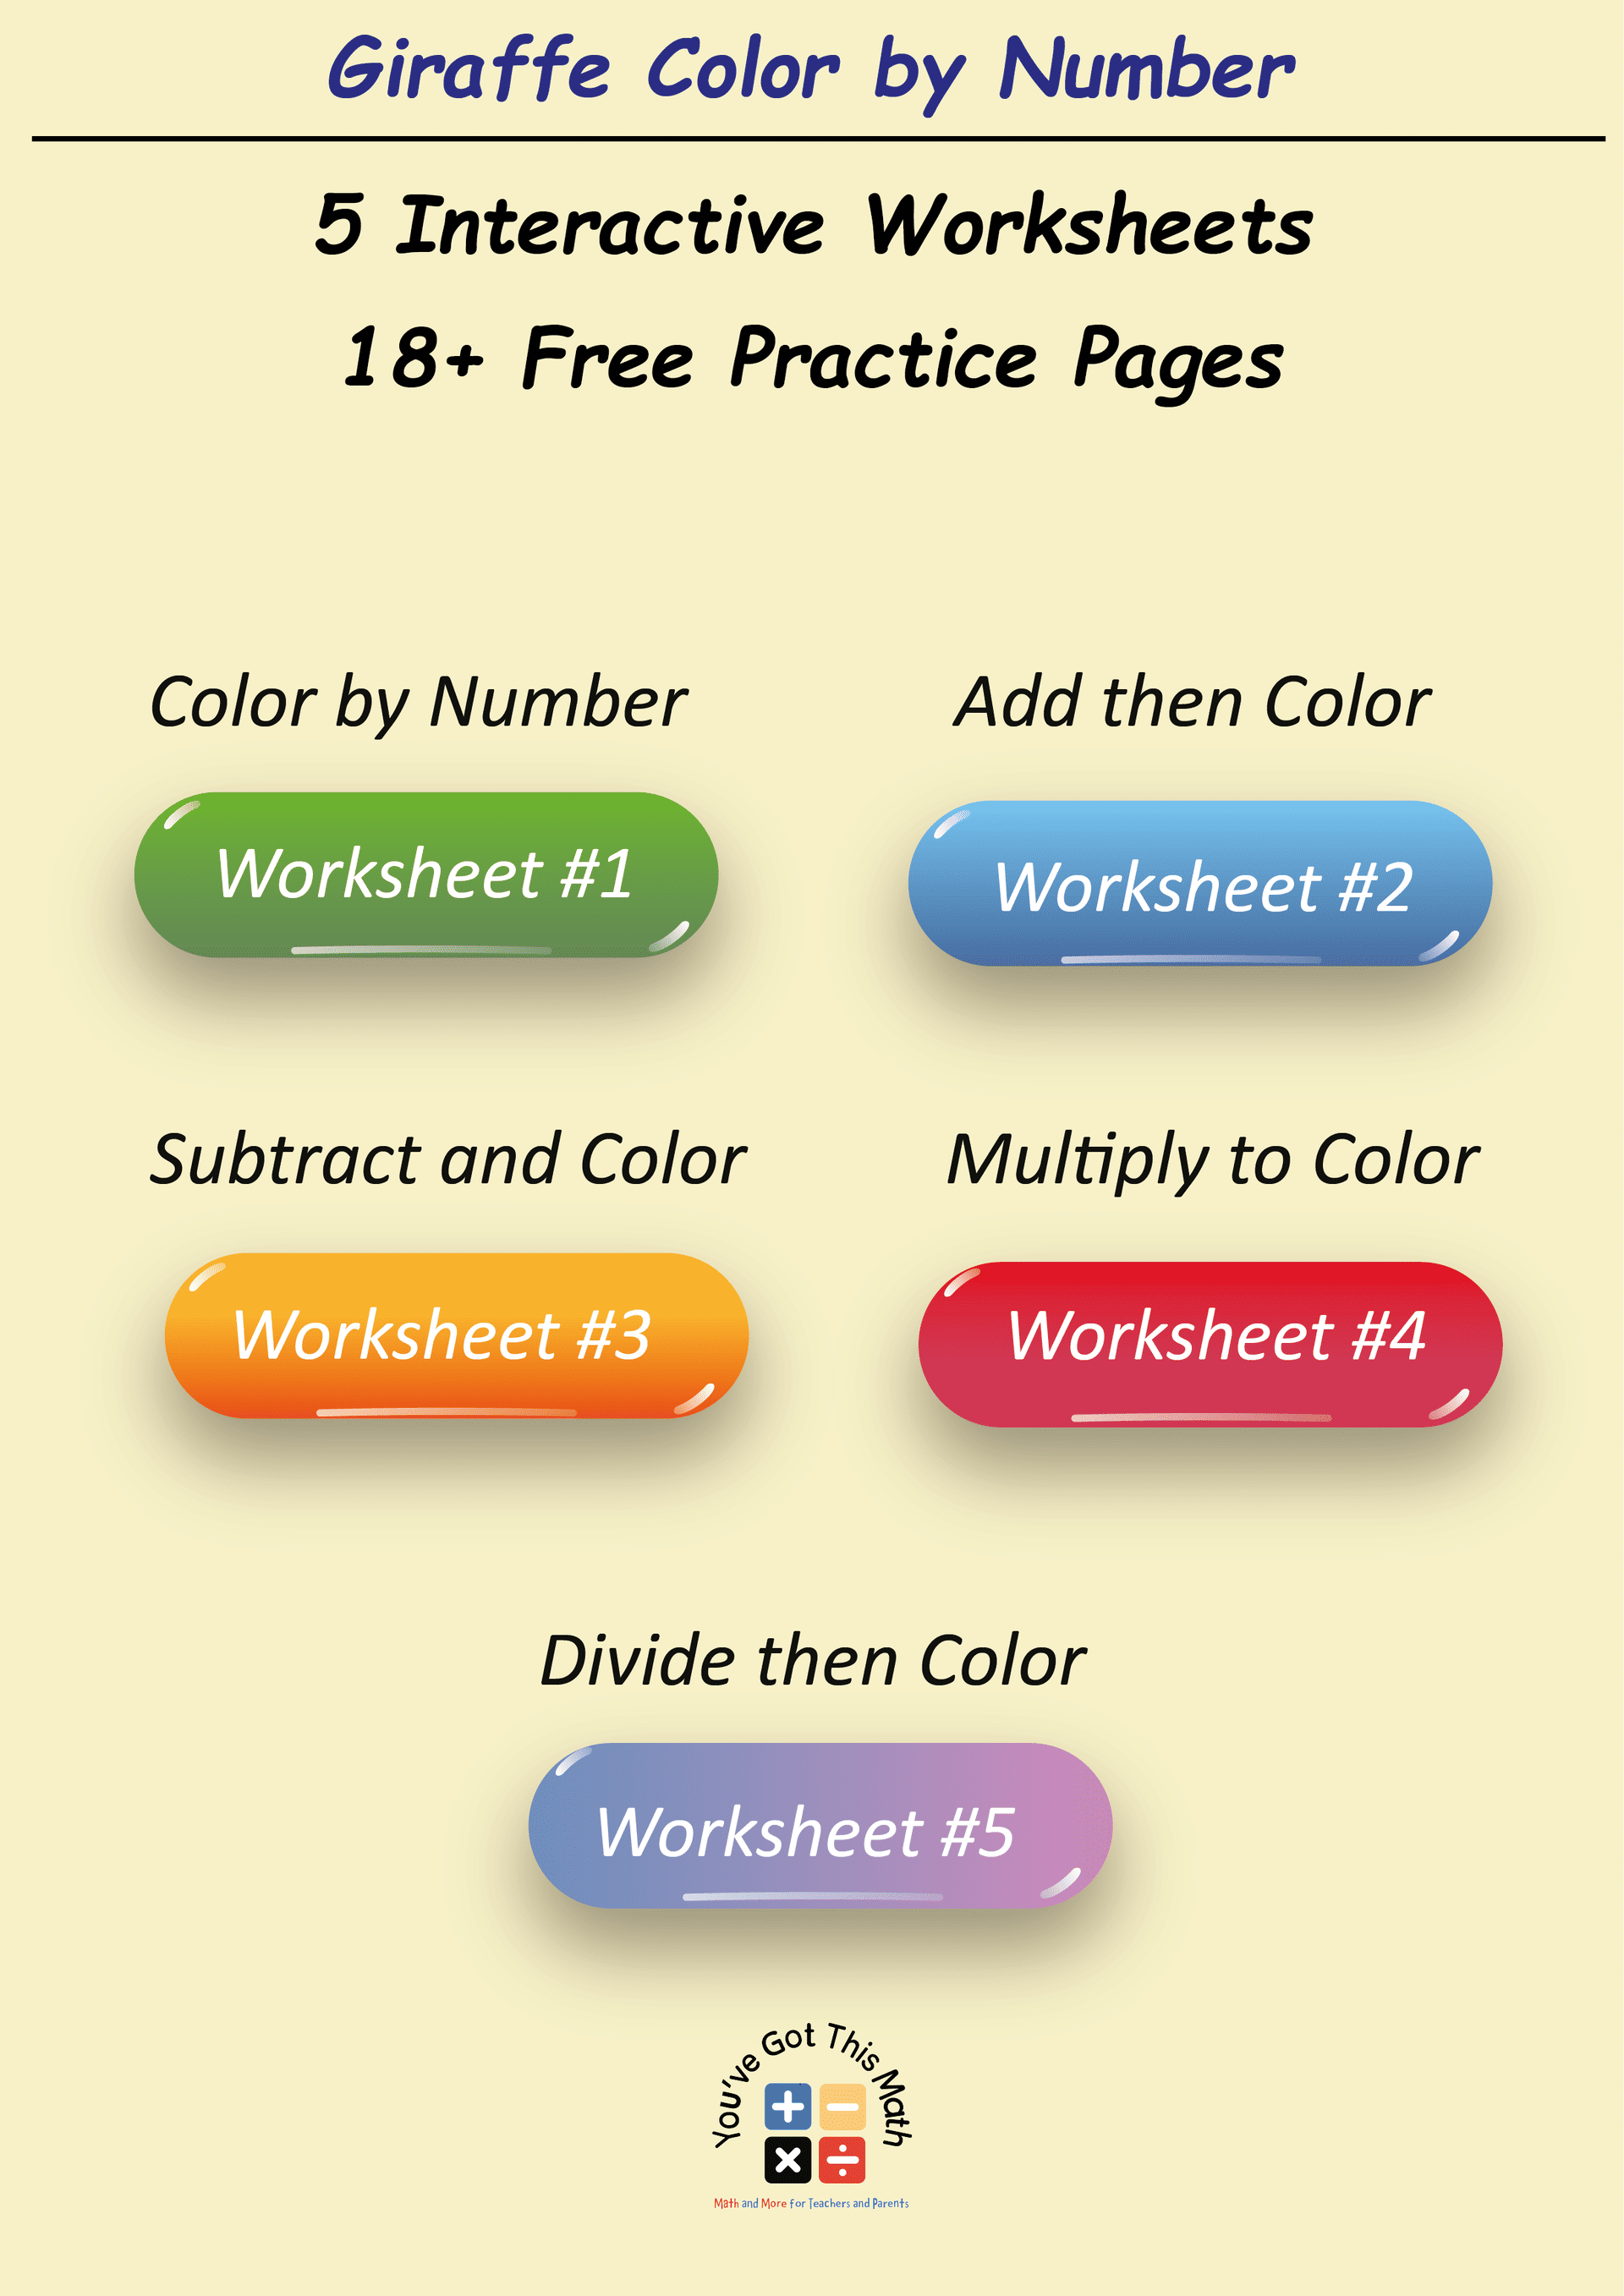 Giraffe color by number worksheet overview